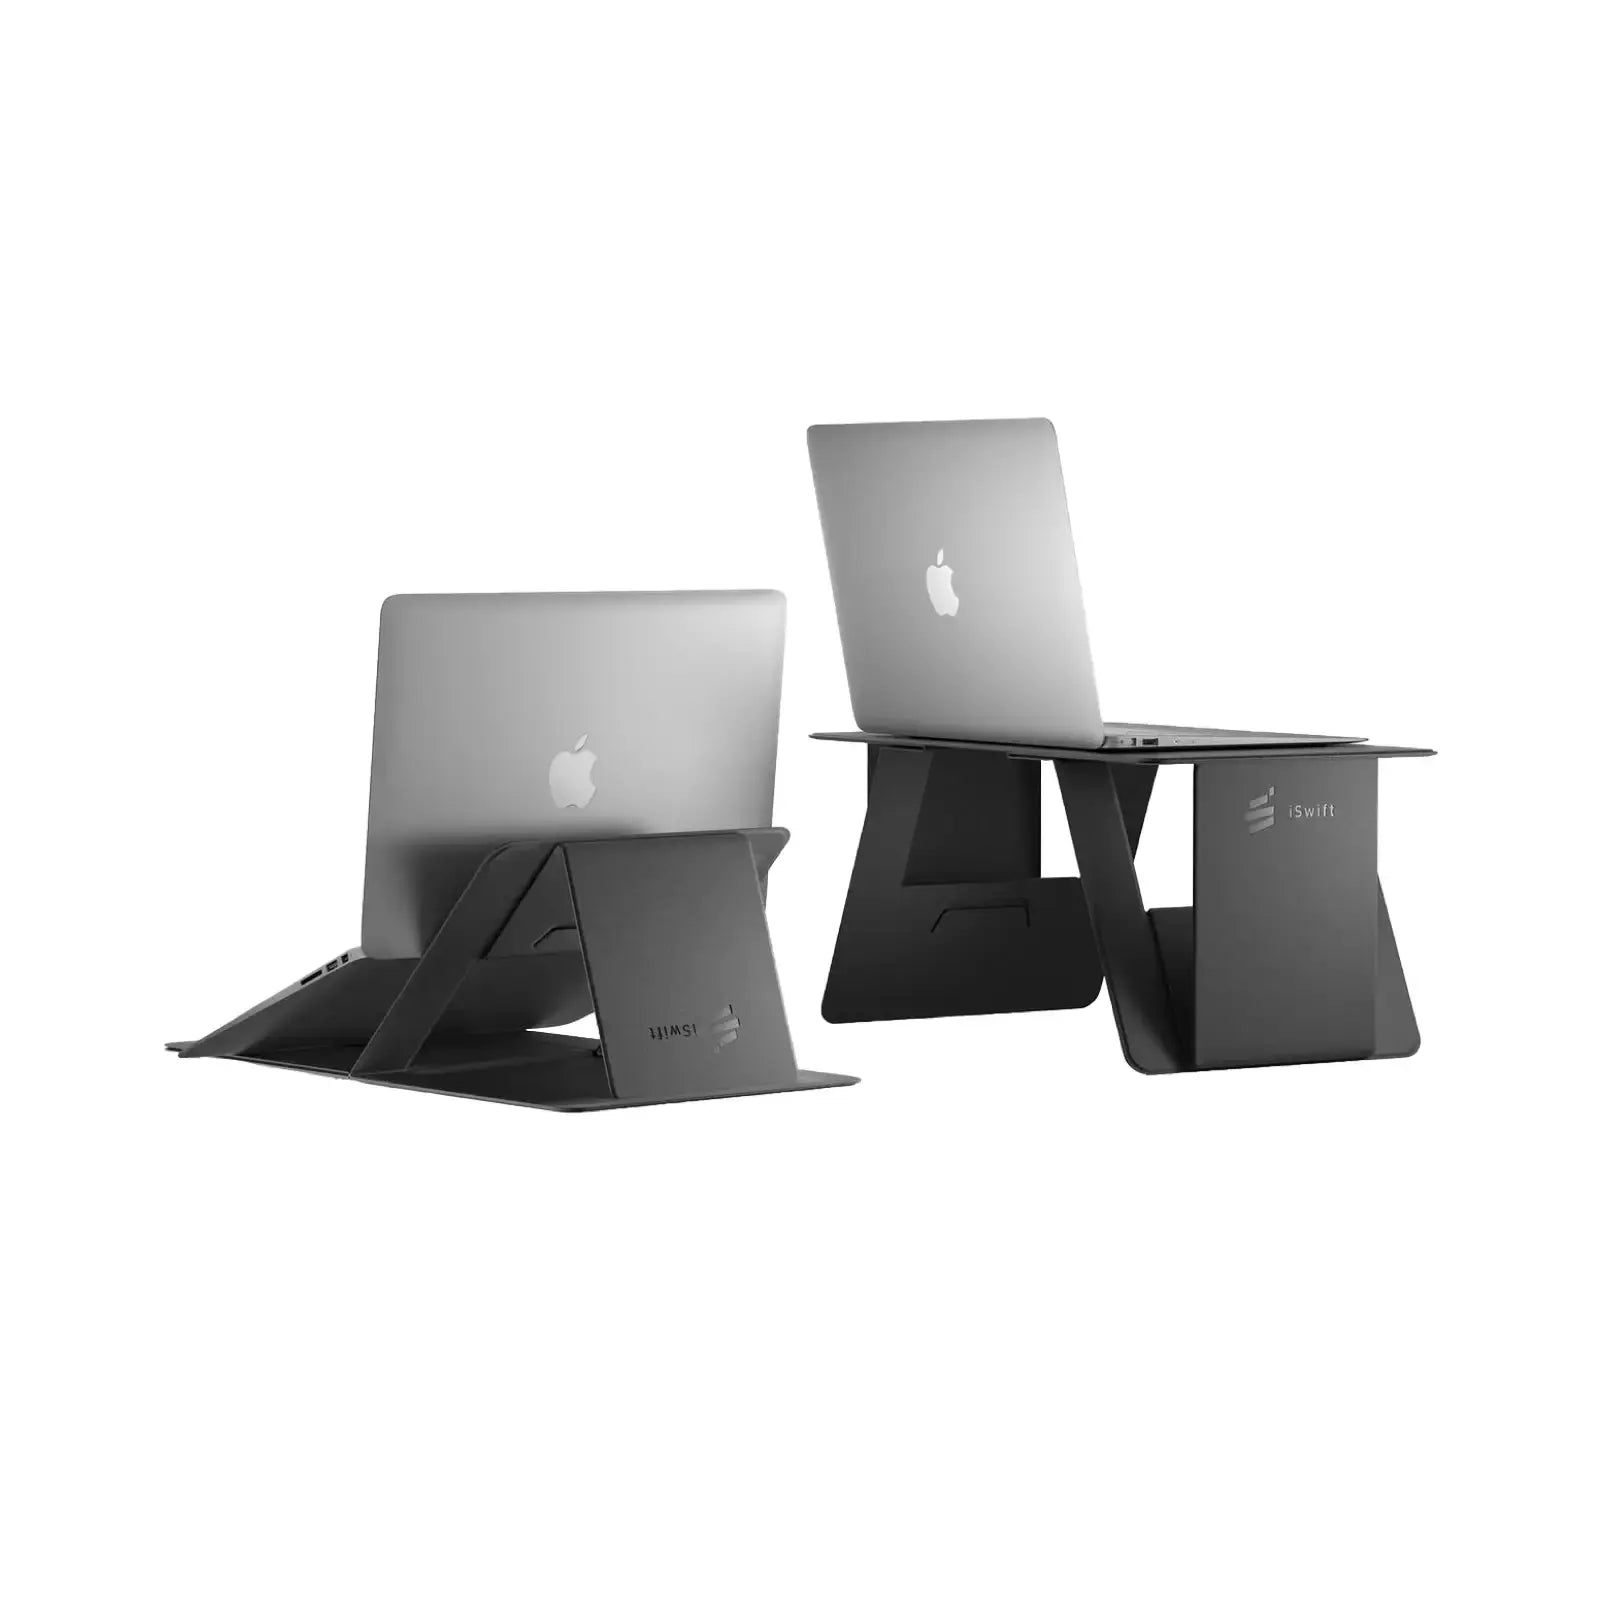 iSwift Paper-Thin Laptop Table For Bed Cool Gadget